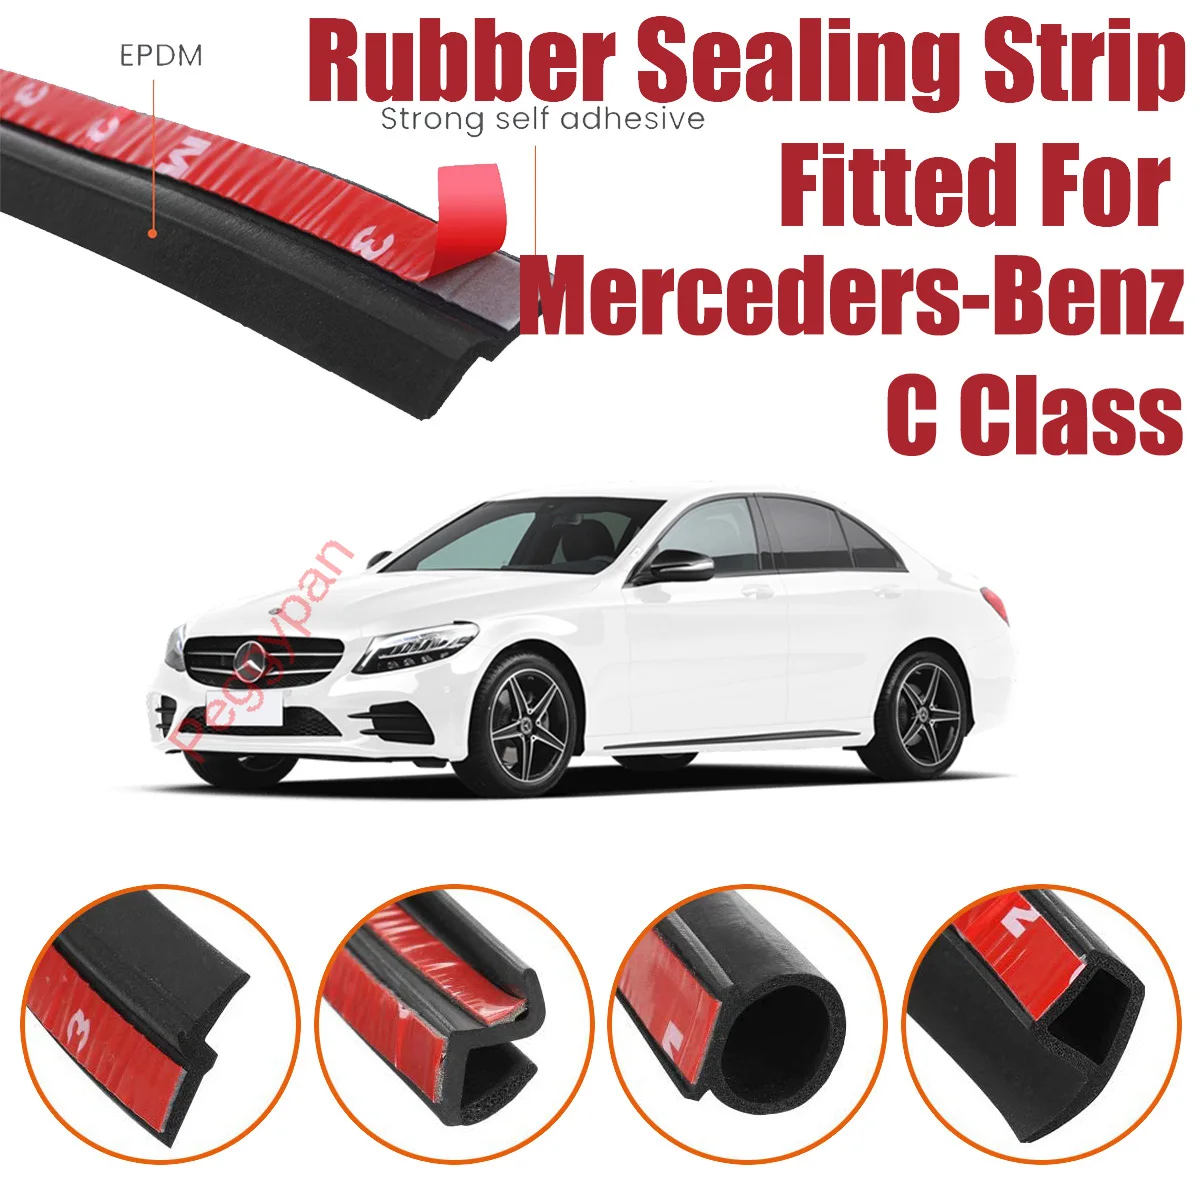 Door Seal Strip Kit Self Adhesive Window Engine Cover Soundproof Rubber Weather Draft Noise Reduction For Mercedes-Benz C Class